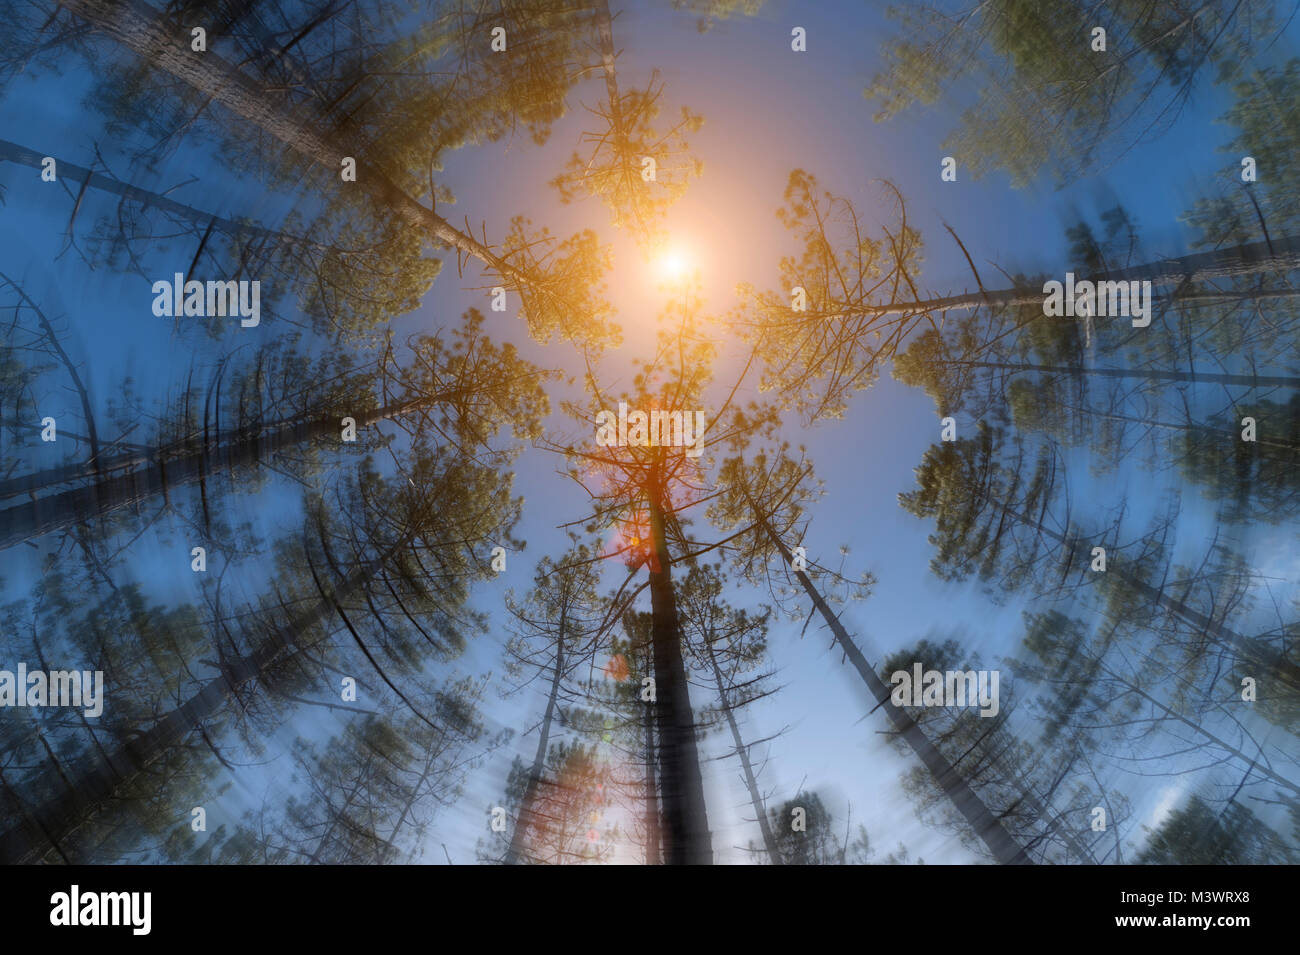 looking up to the sky through the trees, spinning concept Stock Photo